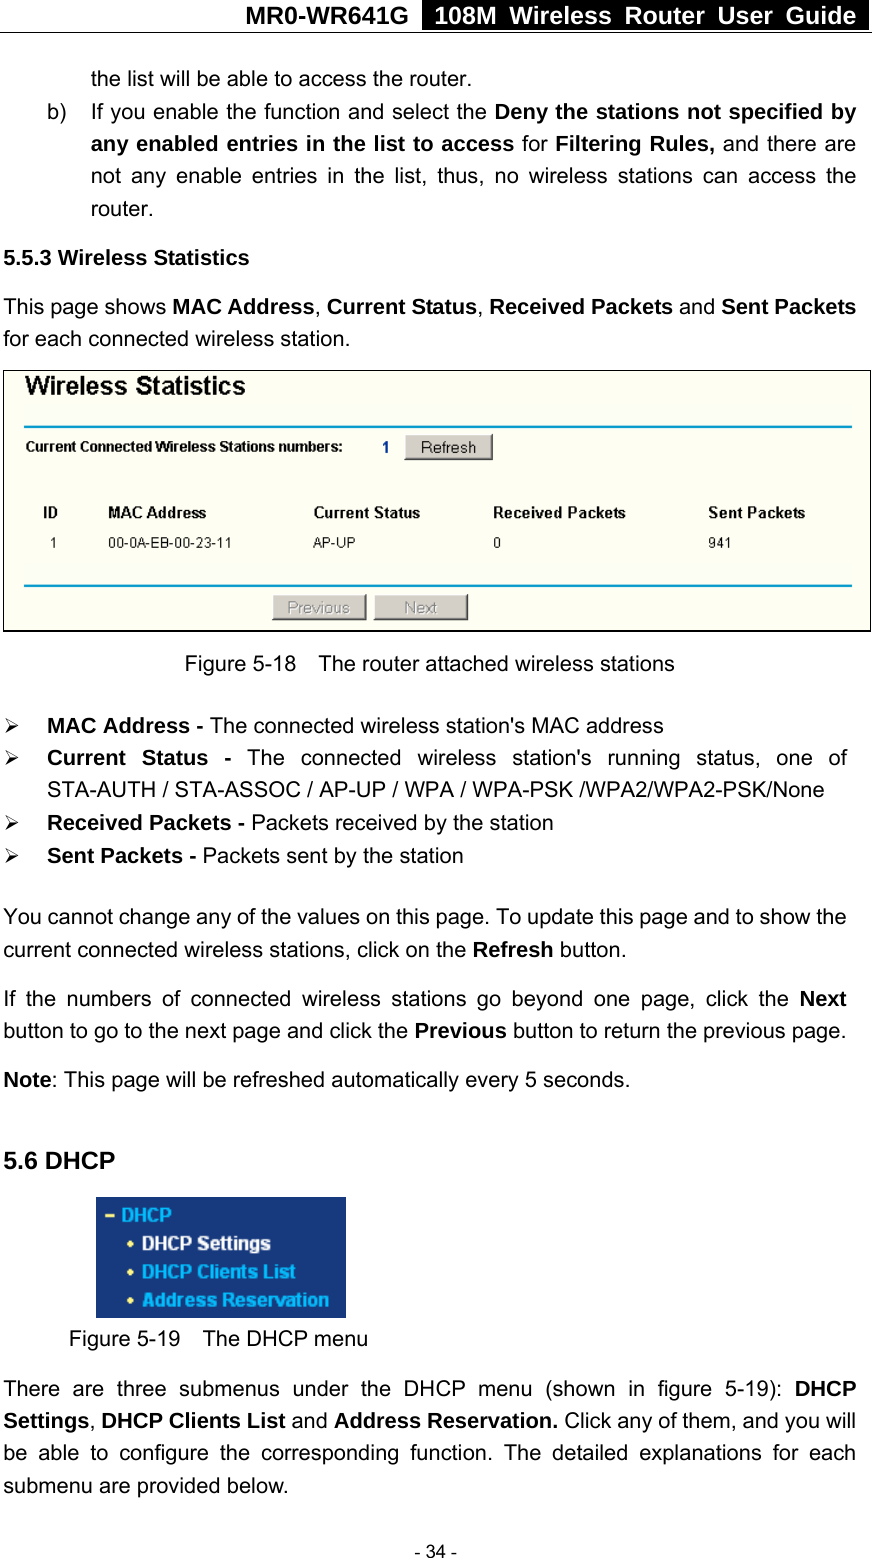 MR0-WR641G   108M Wireless Router User Guide  the list will be able to access the router. b)  If you enable the function and select the Deny the stations not specified by any enabled entries in the list to access for Filtering Rules, and there are not any enable entries in the list, thus, no wireless stations can access the router. 5.5.3 Wireless Statistics This page shows MAC Address, Current Status, Received Packets and Sent Packets for each connected wireless station.  Figure 5-18    The router attached wireless stations ¾ MAC Address - The connected wireless station&apos;s MAC address ¾ Current Status - The connected wireless station&apos;s running status, one of STA-AUTH / STA-ASSOC / AP-UP / WPA / WPA-PSK /WPA2/WPA2-PSK/None ¾ Received Packets - Packets received by the station ¾ Sent Packets - Packets sent by the station You cannot change any of the values on this page. To update this page and to show the current connected wireless stations, click on the Refresh button.   If the numbers of connected wireless stations go beyond one page, click the Next button to go to the next page and click the Previous button to return the previous page. Note: This page will be refreshed automatically every 5 seconds.  5.6 DHCP  Figure 5-19    The DHCP menu There are three submenus under the DHCP menu (shown in figure 5-19): DHCP Settings, DHCP Clients List and Address Reservation. Click any of them, and you will be able to configure the corresponding function. The detailed explanations for each submenu are provided below.  - 34 - 